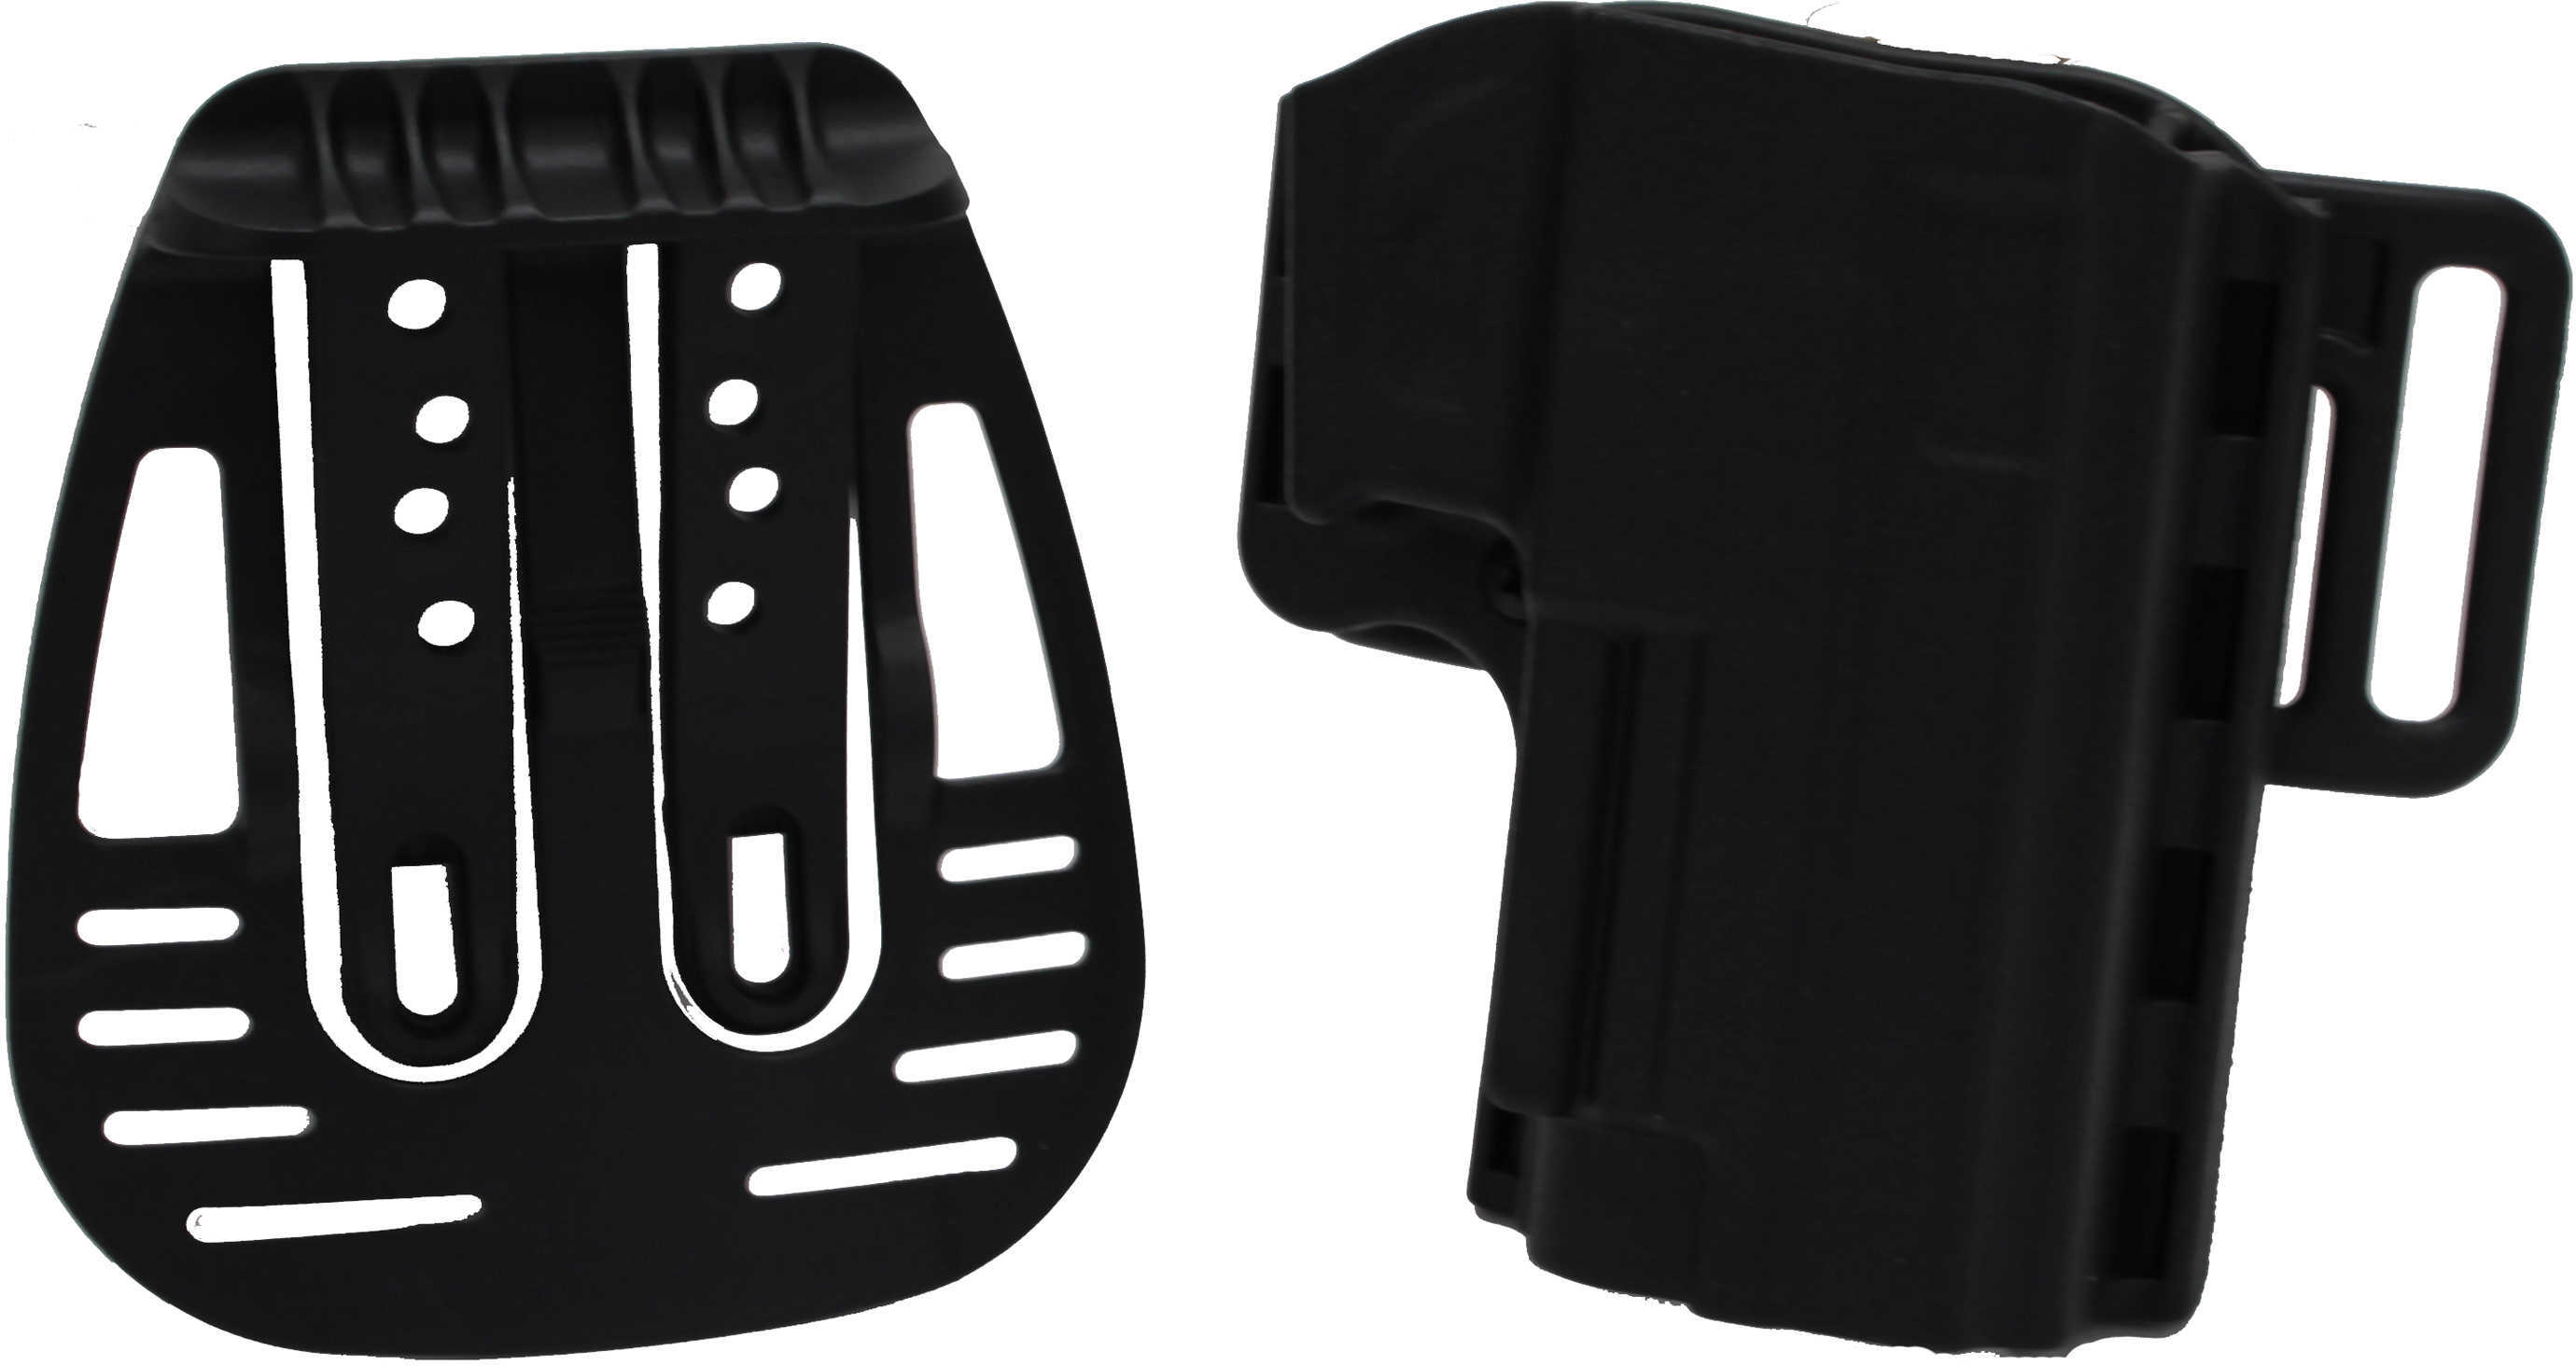 Uncle Mike's Reflex Holster Right Hand Black Sig P220, P226 Kydex 74221